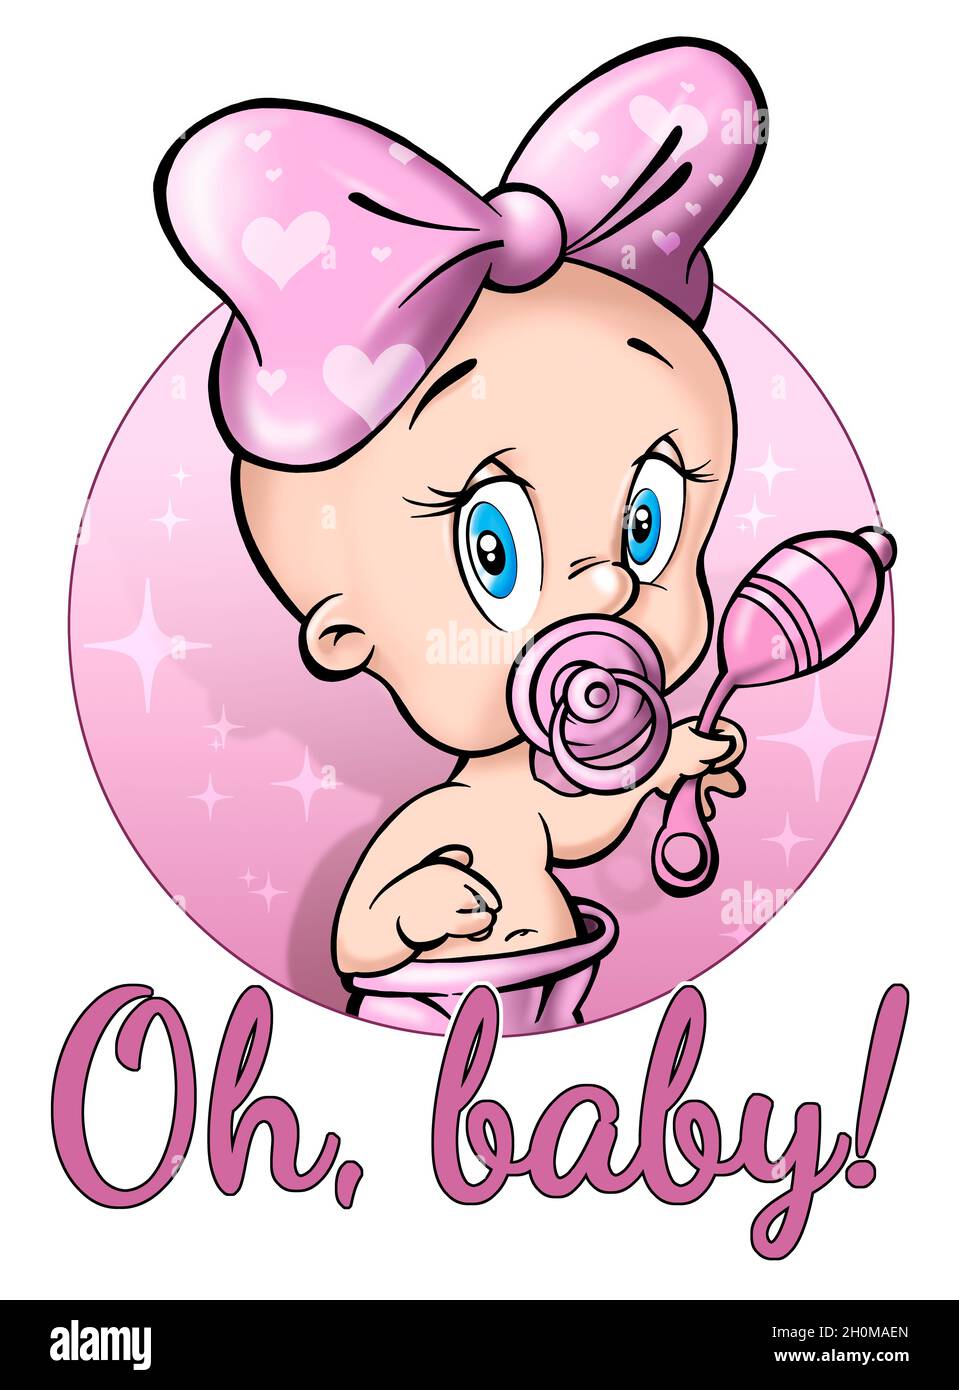 Cute baby with a pink bow and rattle and the inscription Oh, baby! Stock Photo